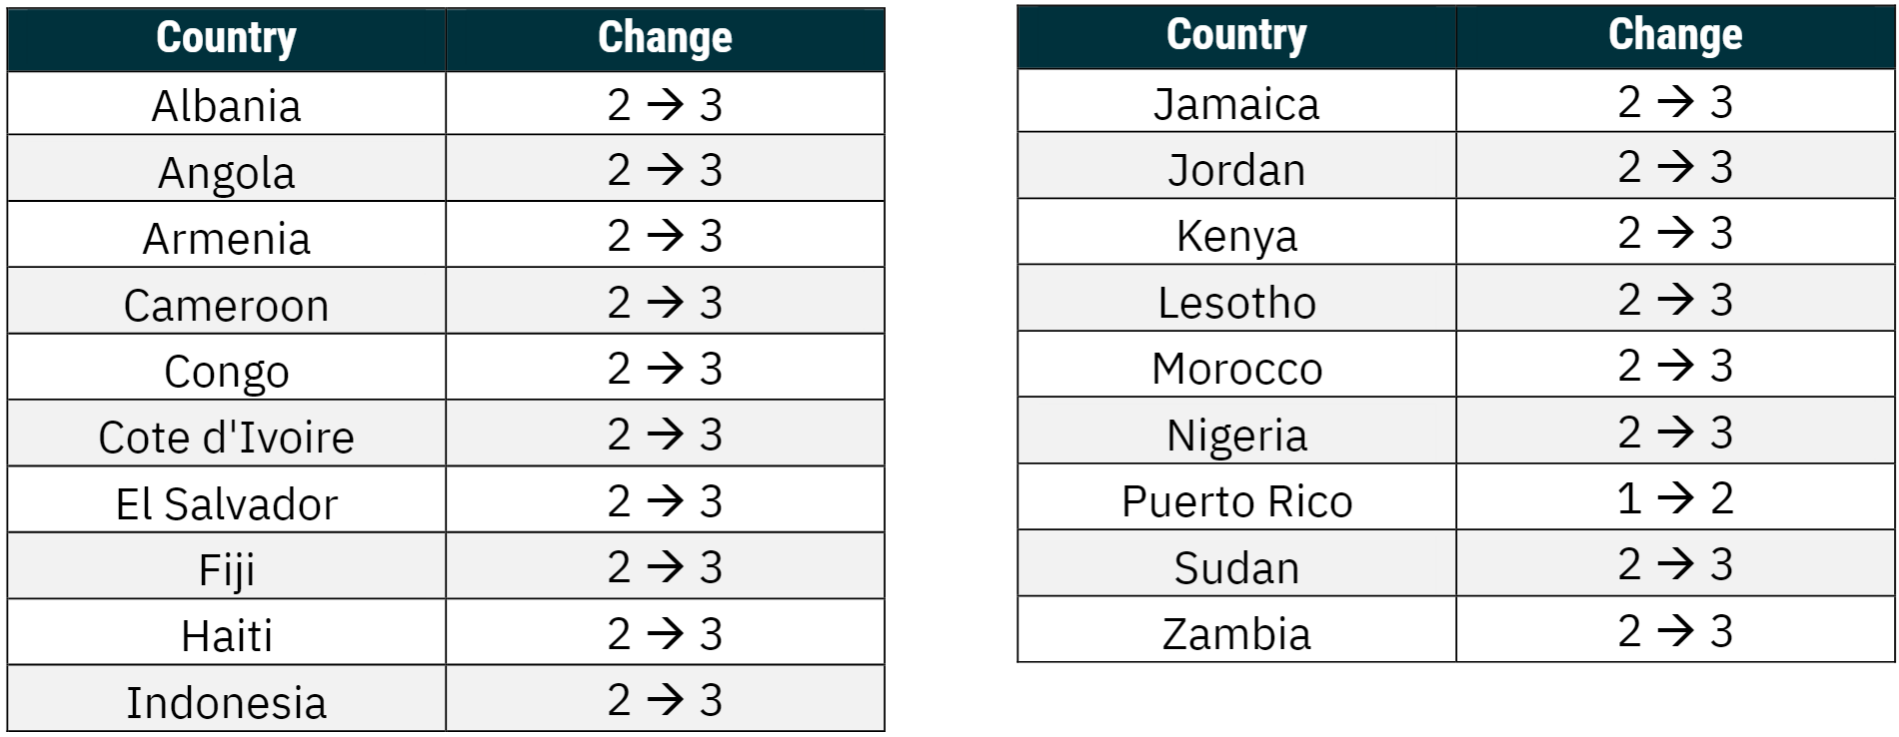 Decreasing: Updated country regions to match the modern, globalized economy